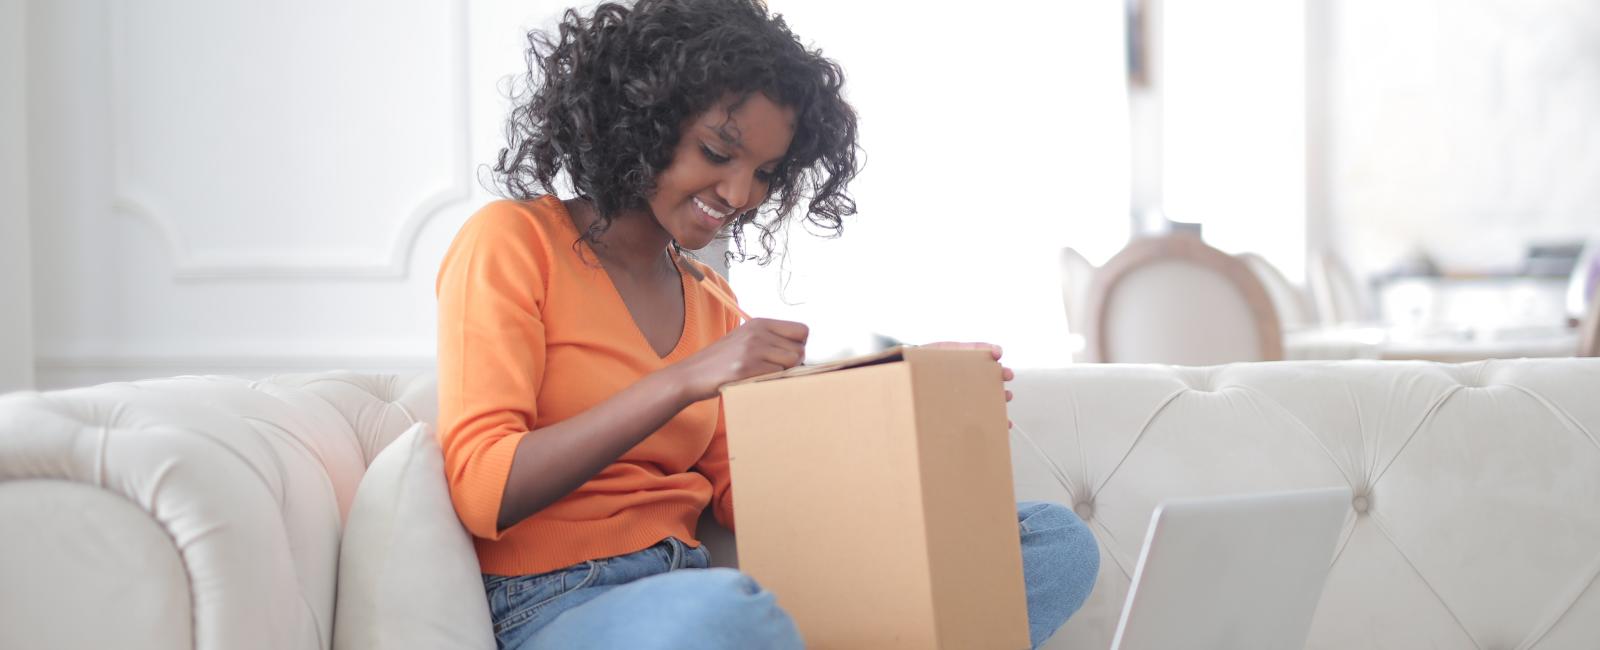 Shipping and packaging tips for small businesses